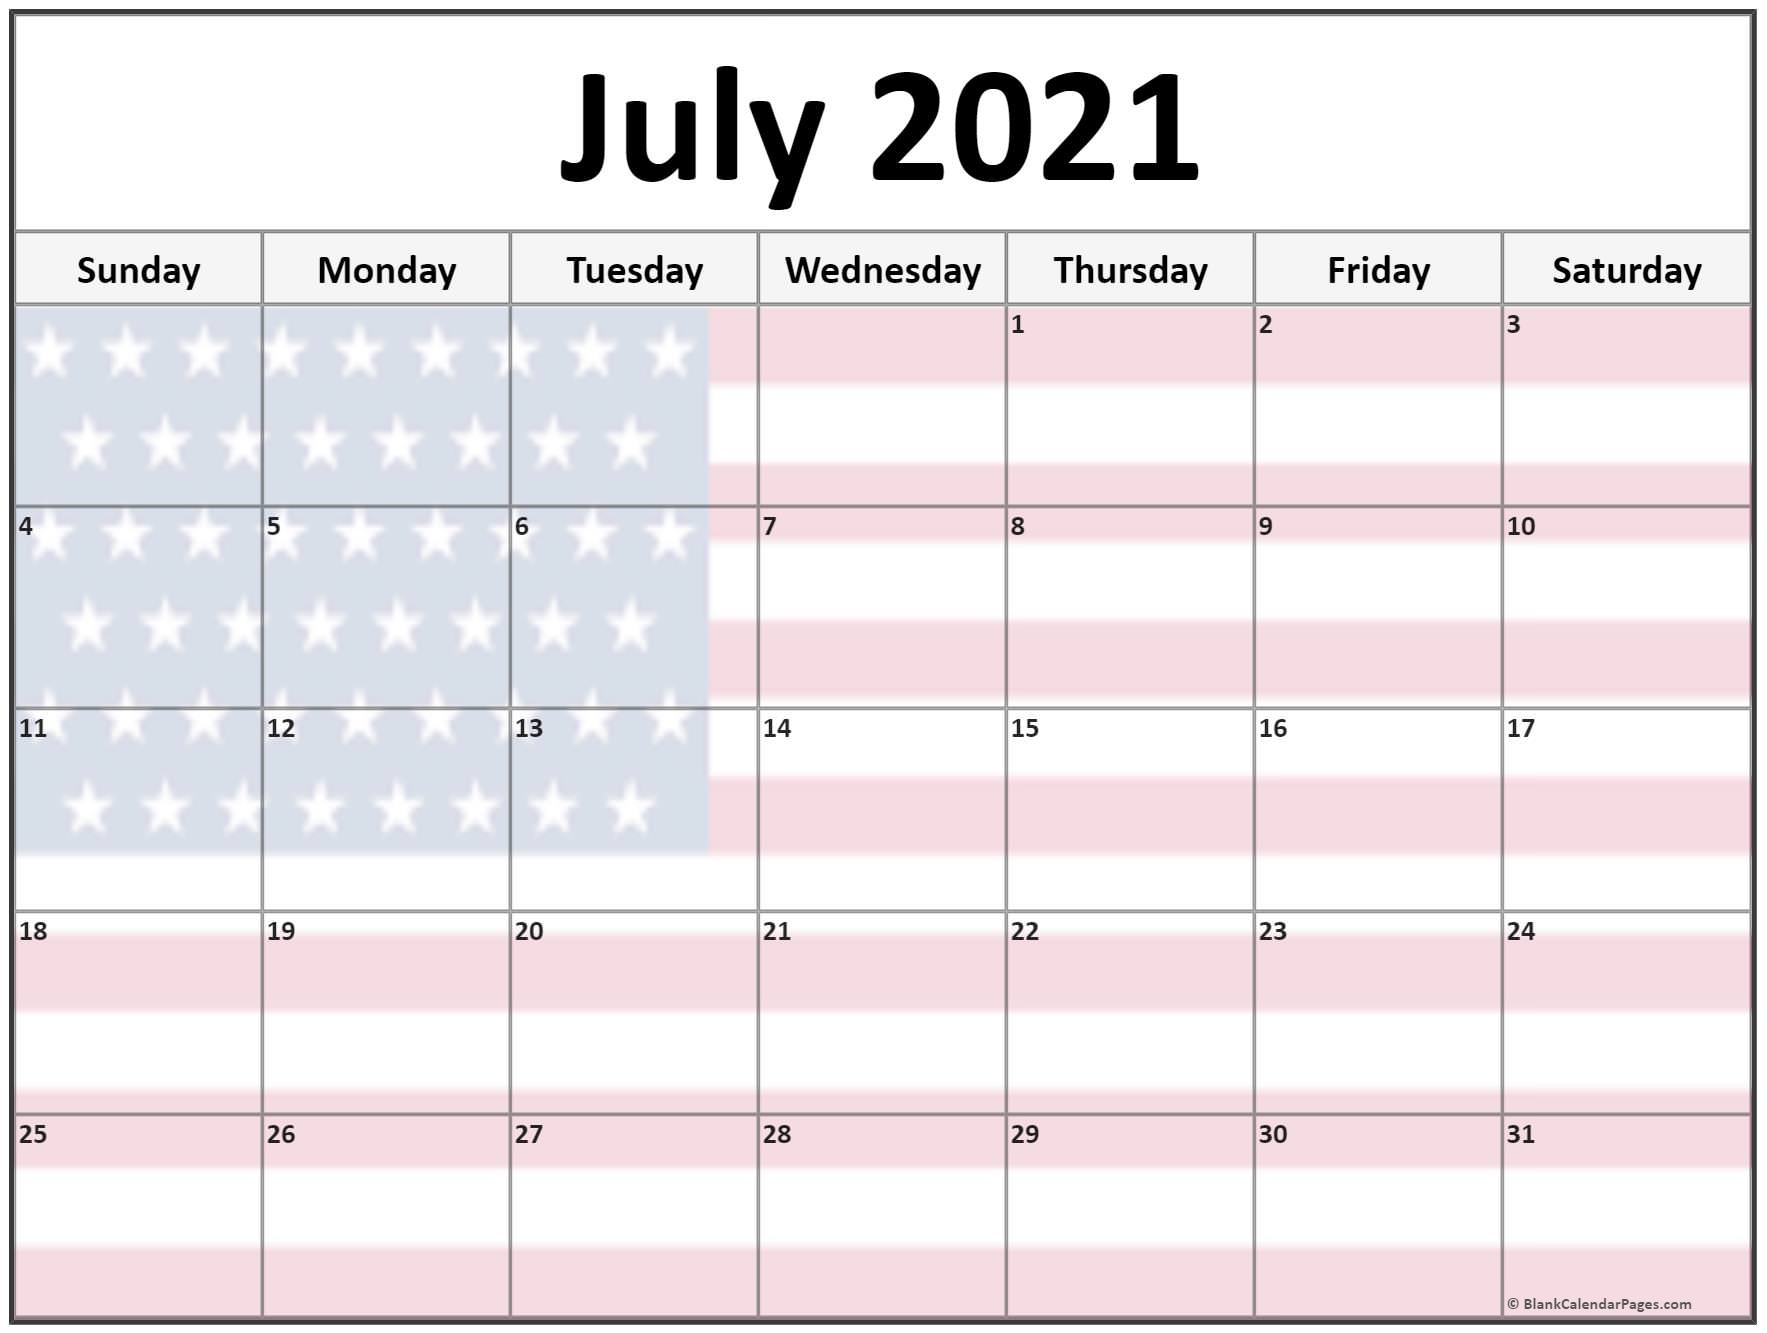 collection of july 2021 photo calendars with image filters